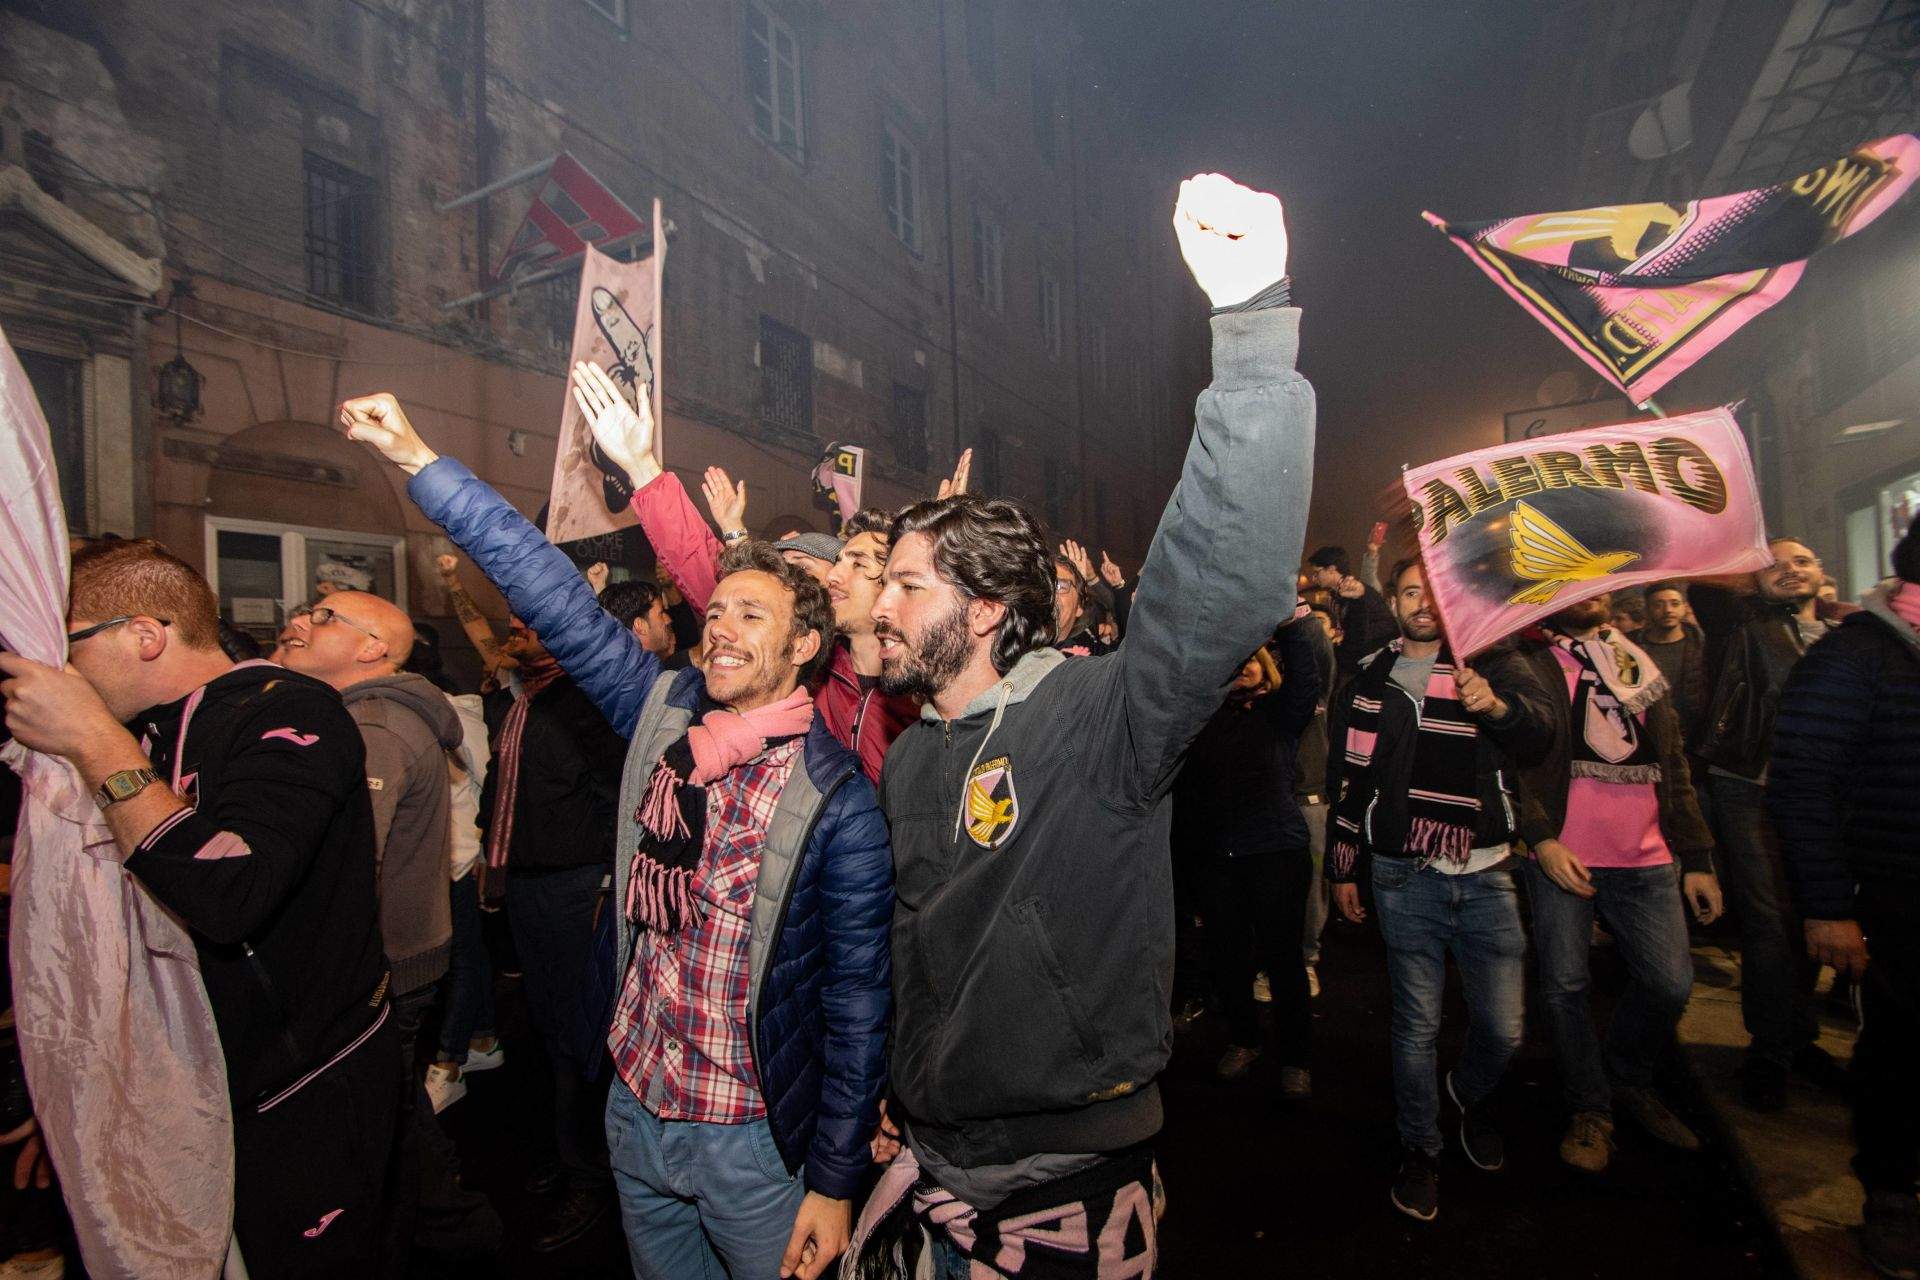 May 15, 2019 - Palermo, Italy - Palermo Football supporters protest in the city after the penalization and relegation of the Serie C team, Palermo. Palermo have been relegated to Serie C because of financial irregularities, ending their hopes of securing promotion to Italy's top division. Palermo finished the Serie B season in third place, earning a spot in the promotion playoffs. However, the national court of the Italian soccer federation ruled that Palermo would end the season at the bottom of Serie B, resulting in relegation. Palermo have been the subject of several failed takeovers in recent months. (Credit Image: � Francesco Militello Mirto/ZUMA Wire/ZUMAPRESS.com) FOT. ZUMA/NEWSPIX.PL POLAND ONLY! --- Newspix.pl *** Local Caption *** www.newspix.pl mail us: info@newspix.pl call us: 0048 022 23 22 222 --- Polish Picture Agency by Ringier Axel Springer Poland